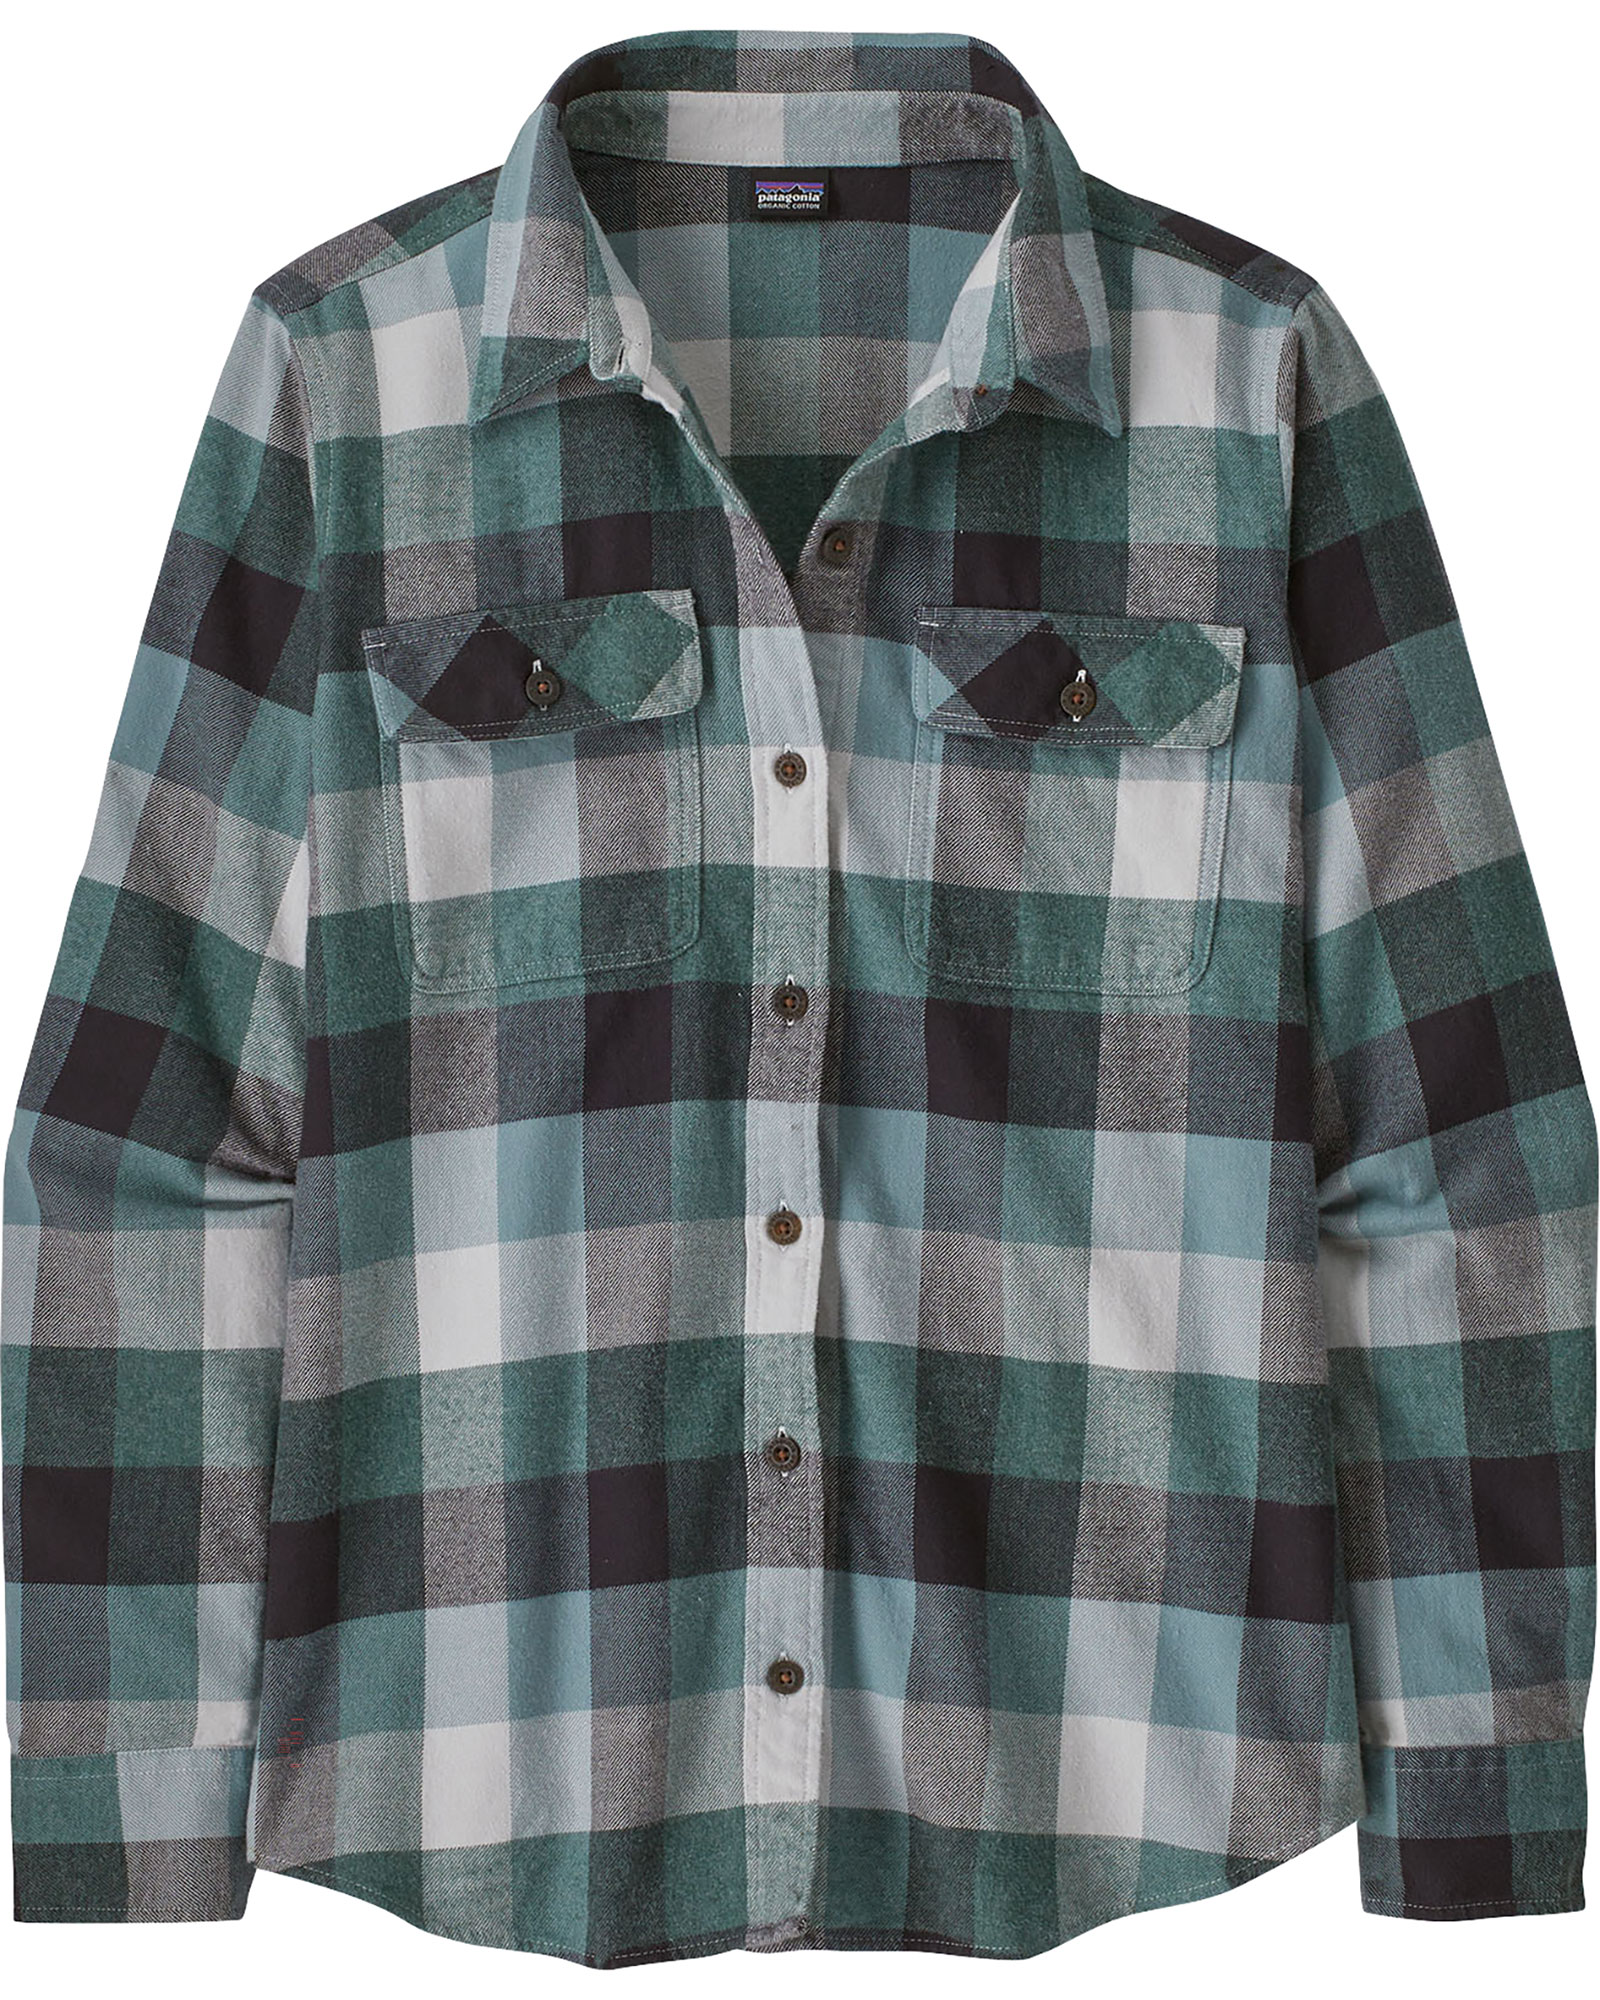 Patagonia Women’s Organic Cotton MW Fjord Flannel Long Sleeved Shirt - Guides: Nouveau Green S